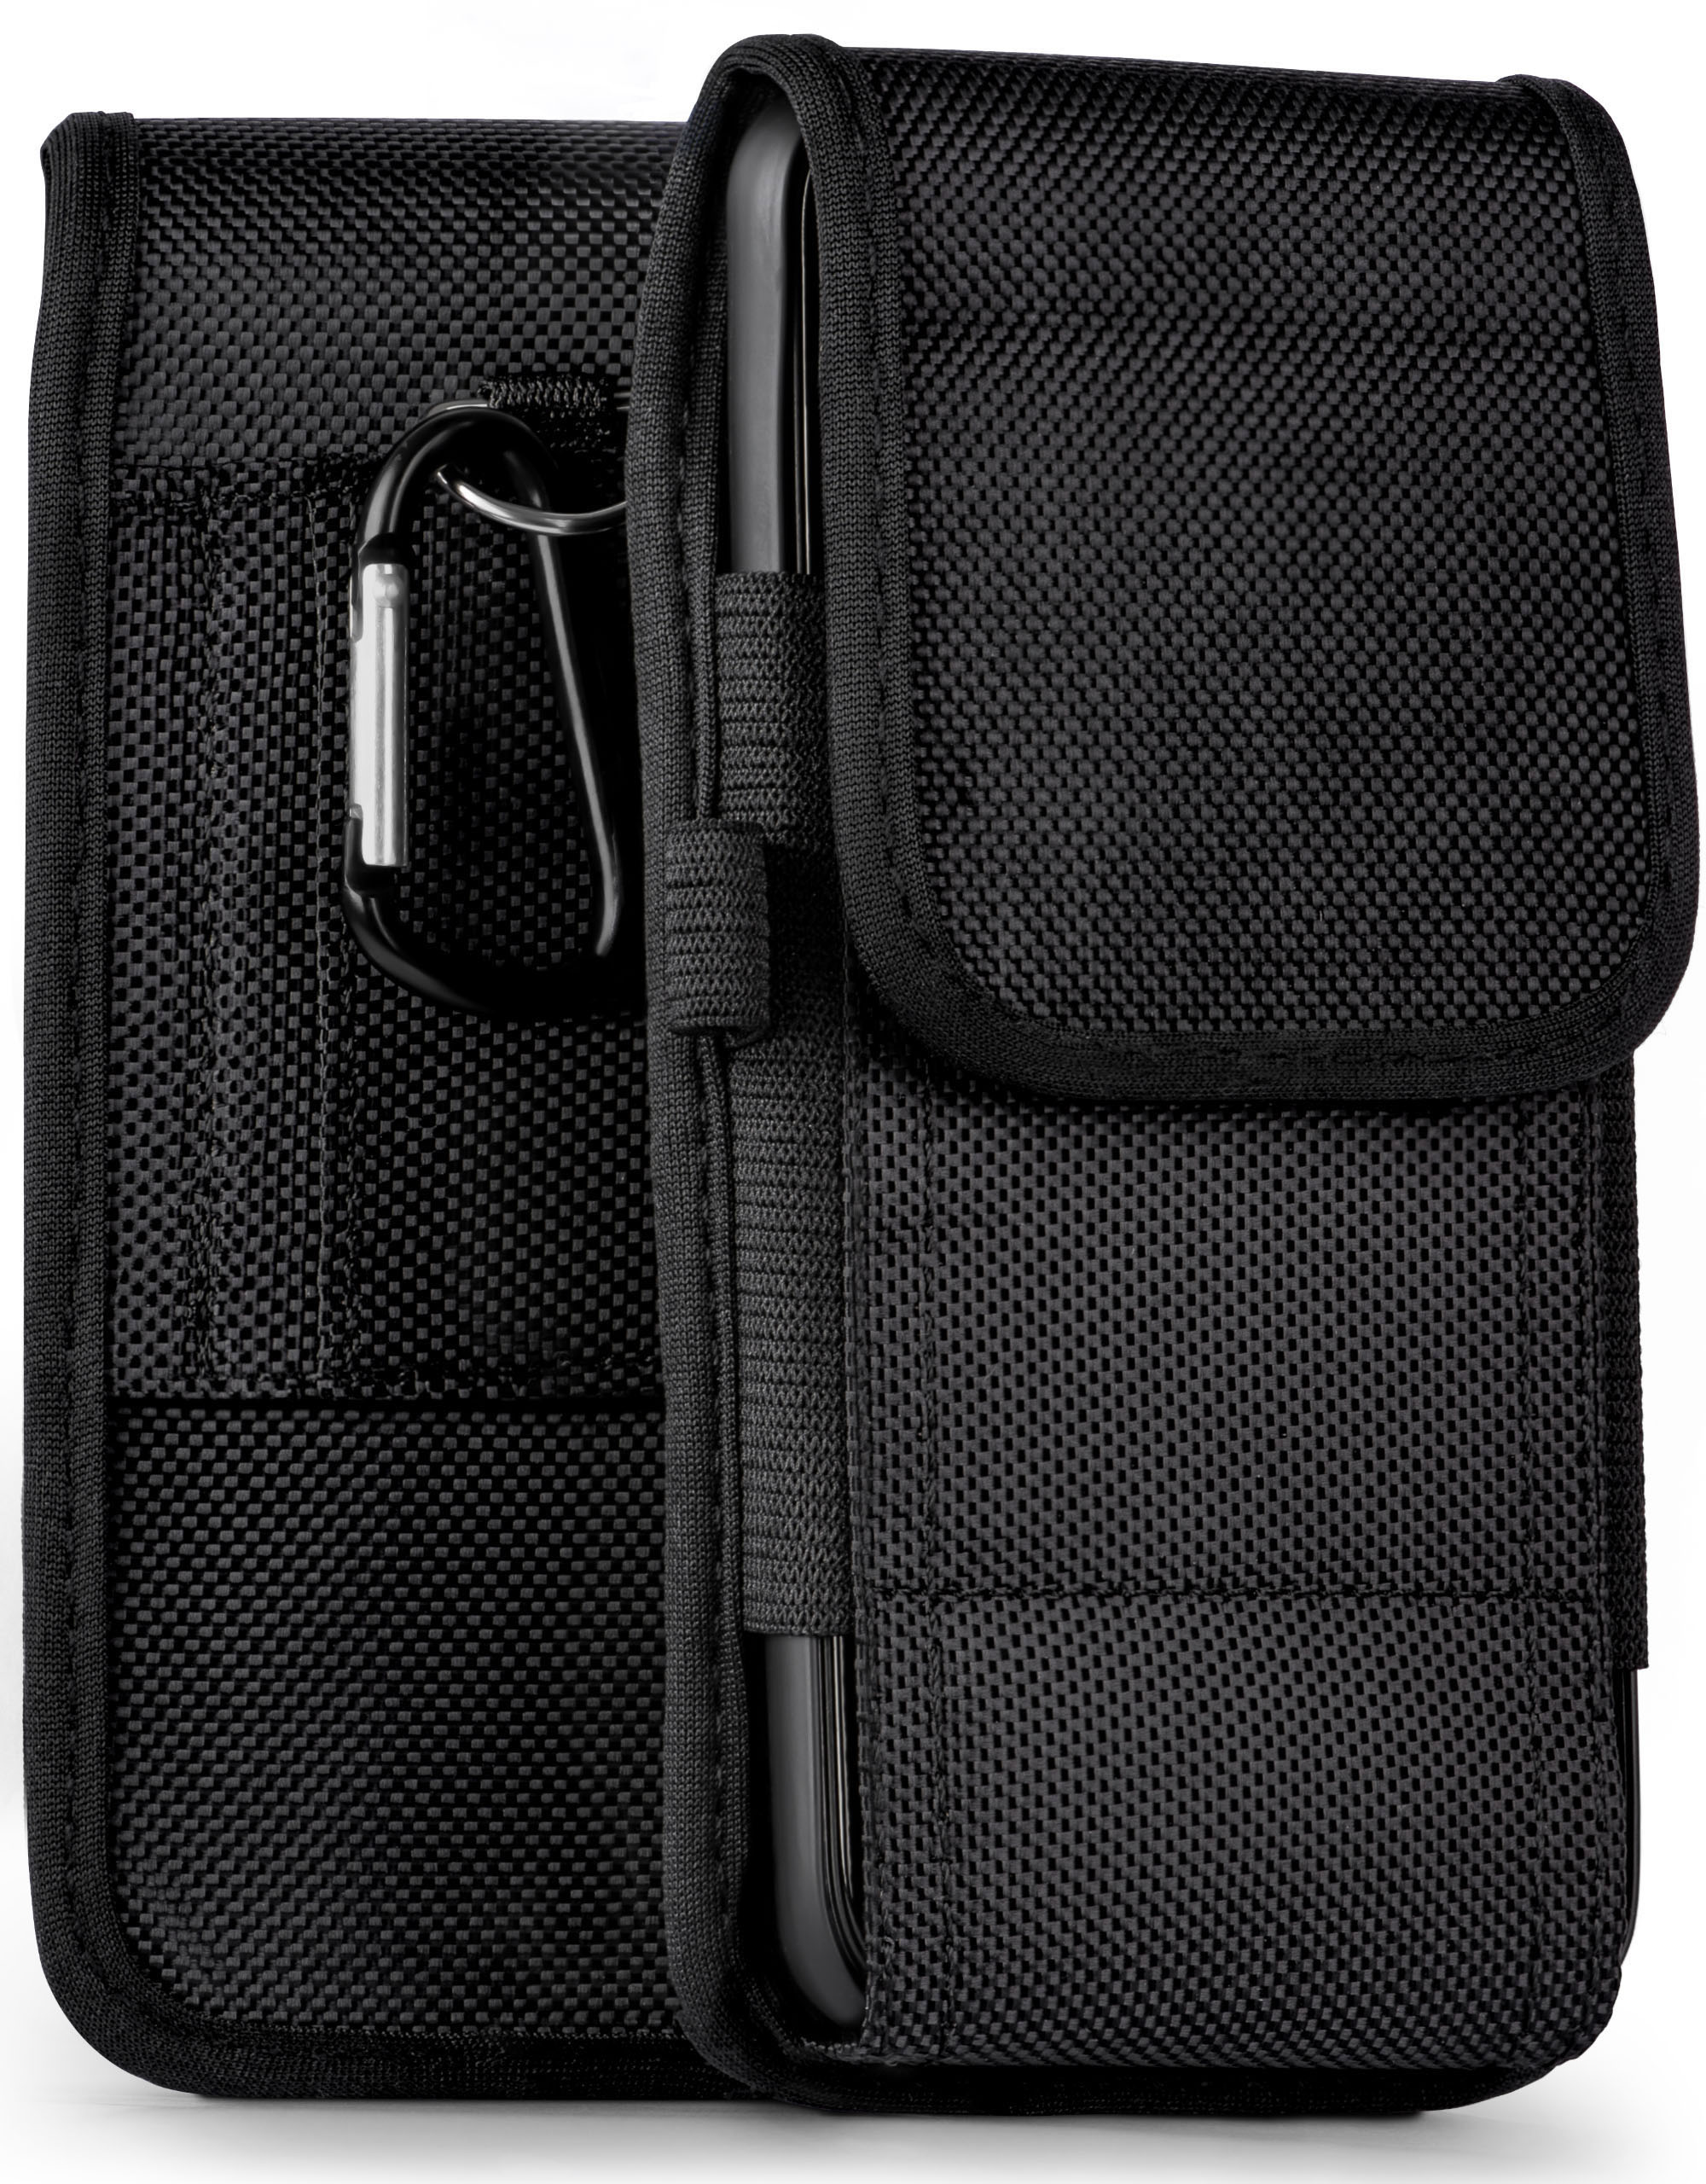 Sharp, Holster, Trail MOEX D10, Aquos Agility Case,